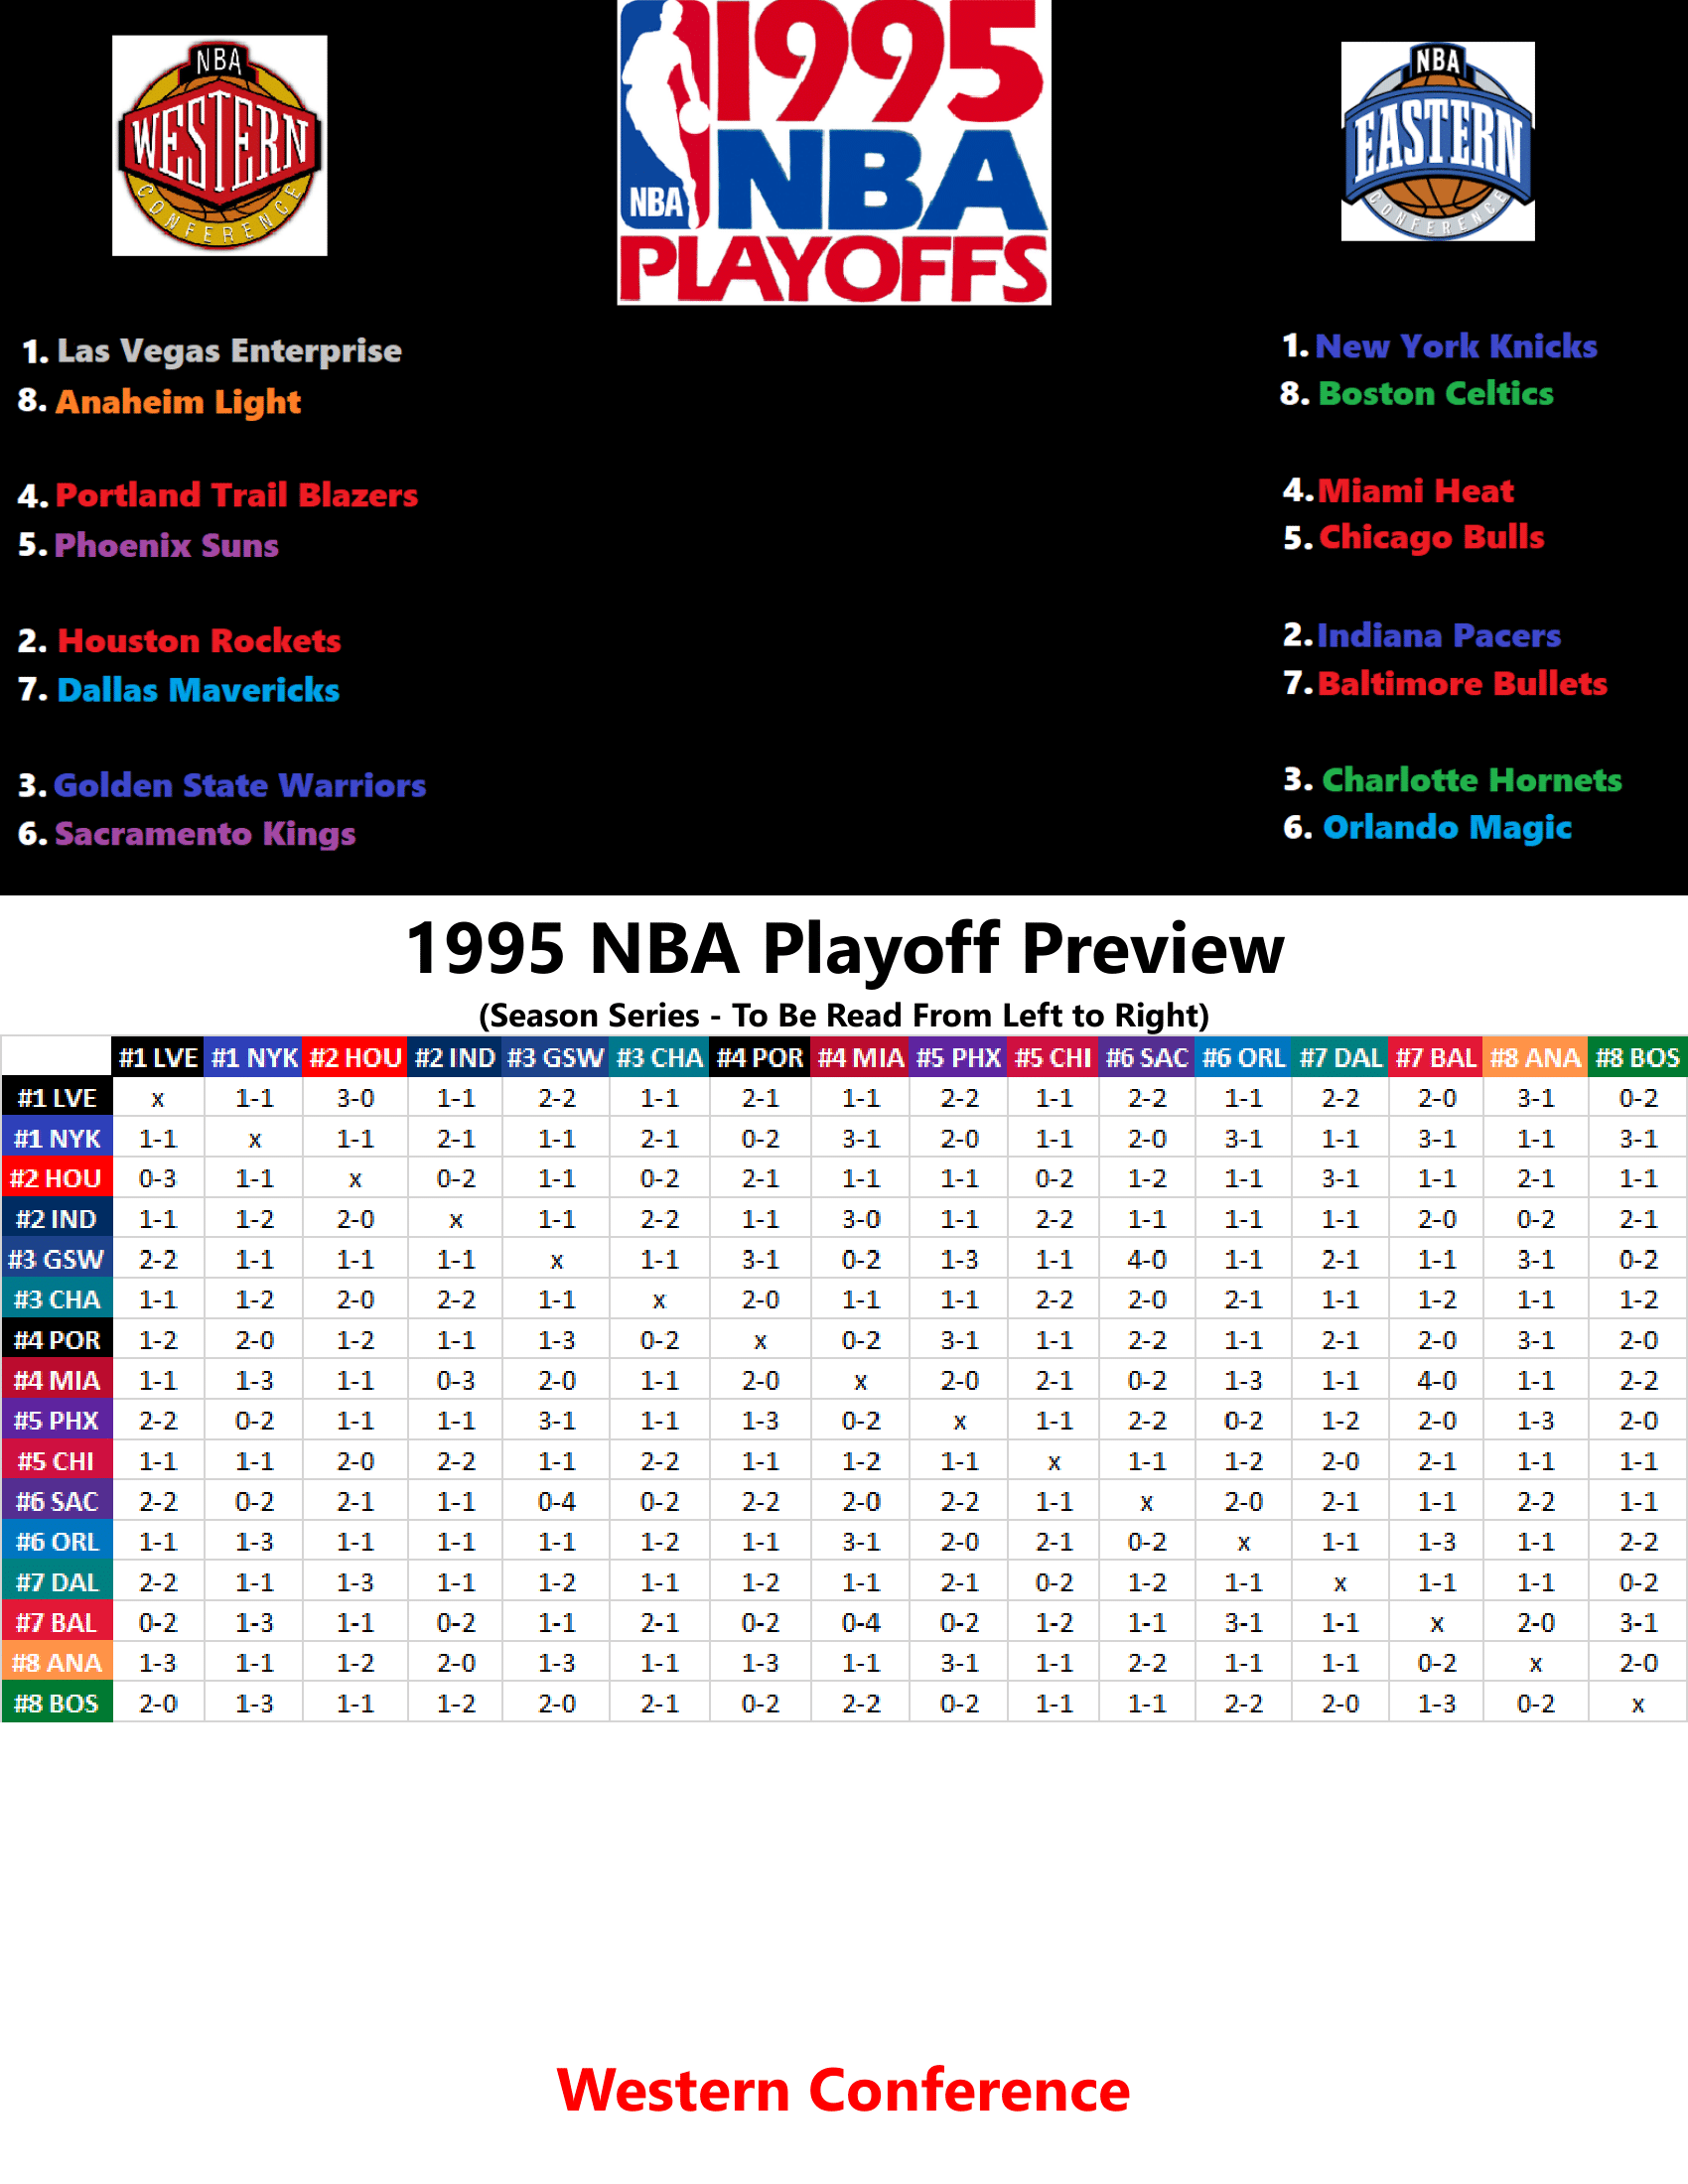 94-95-Part-3-Playoff-Preview-01-1.png